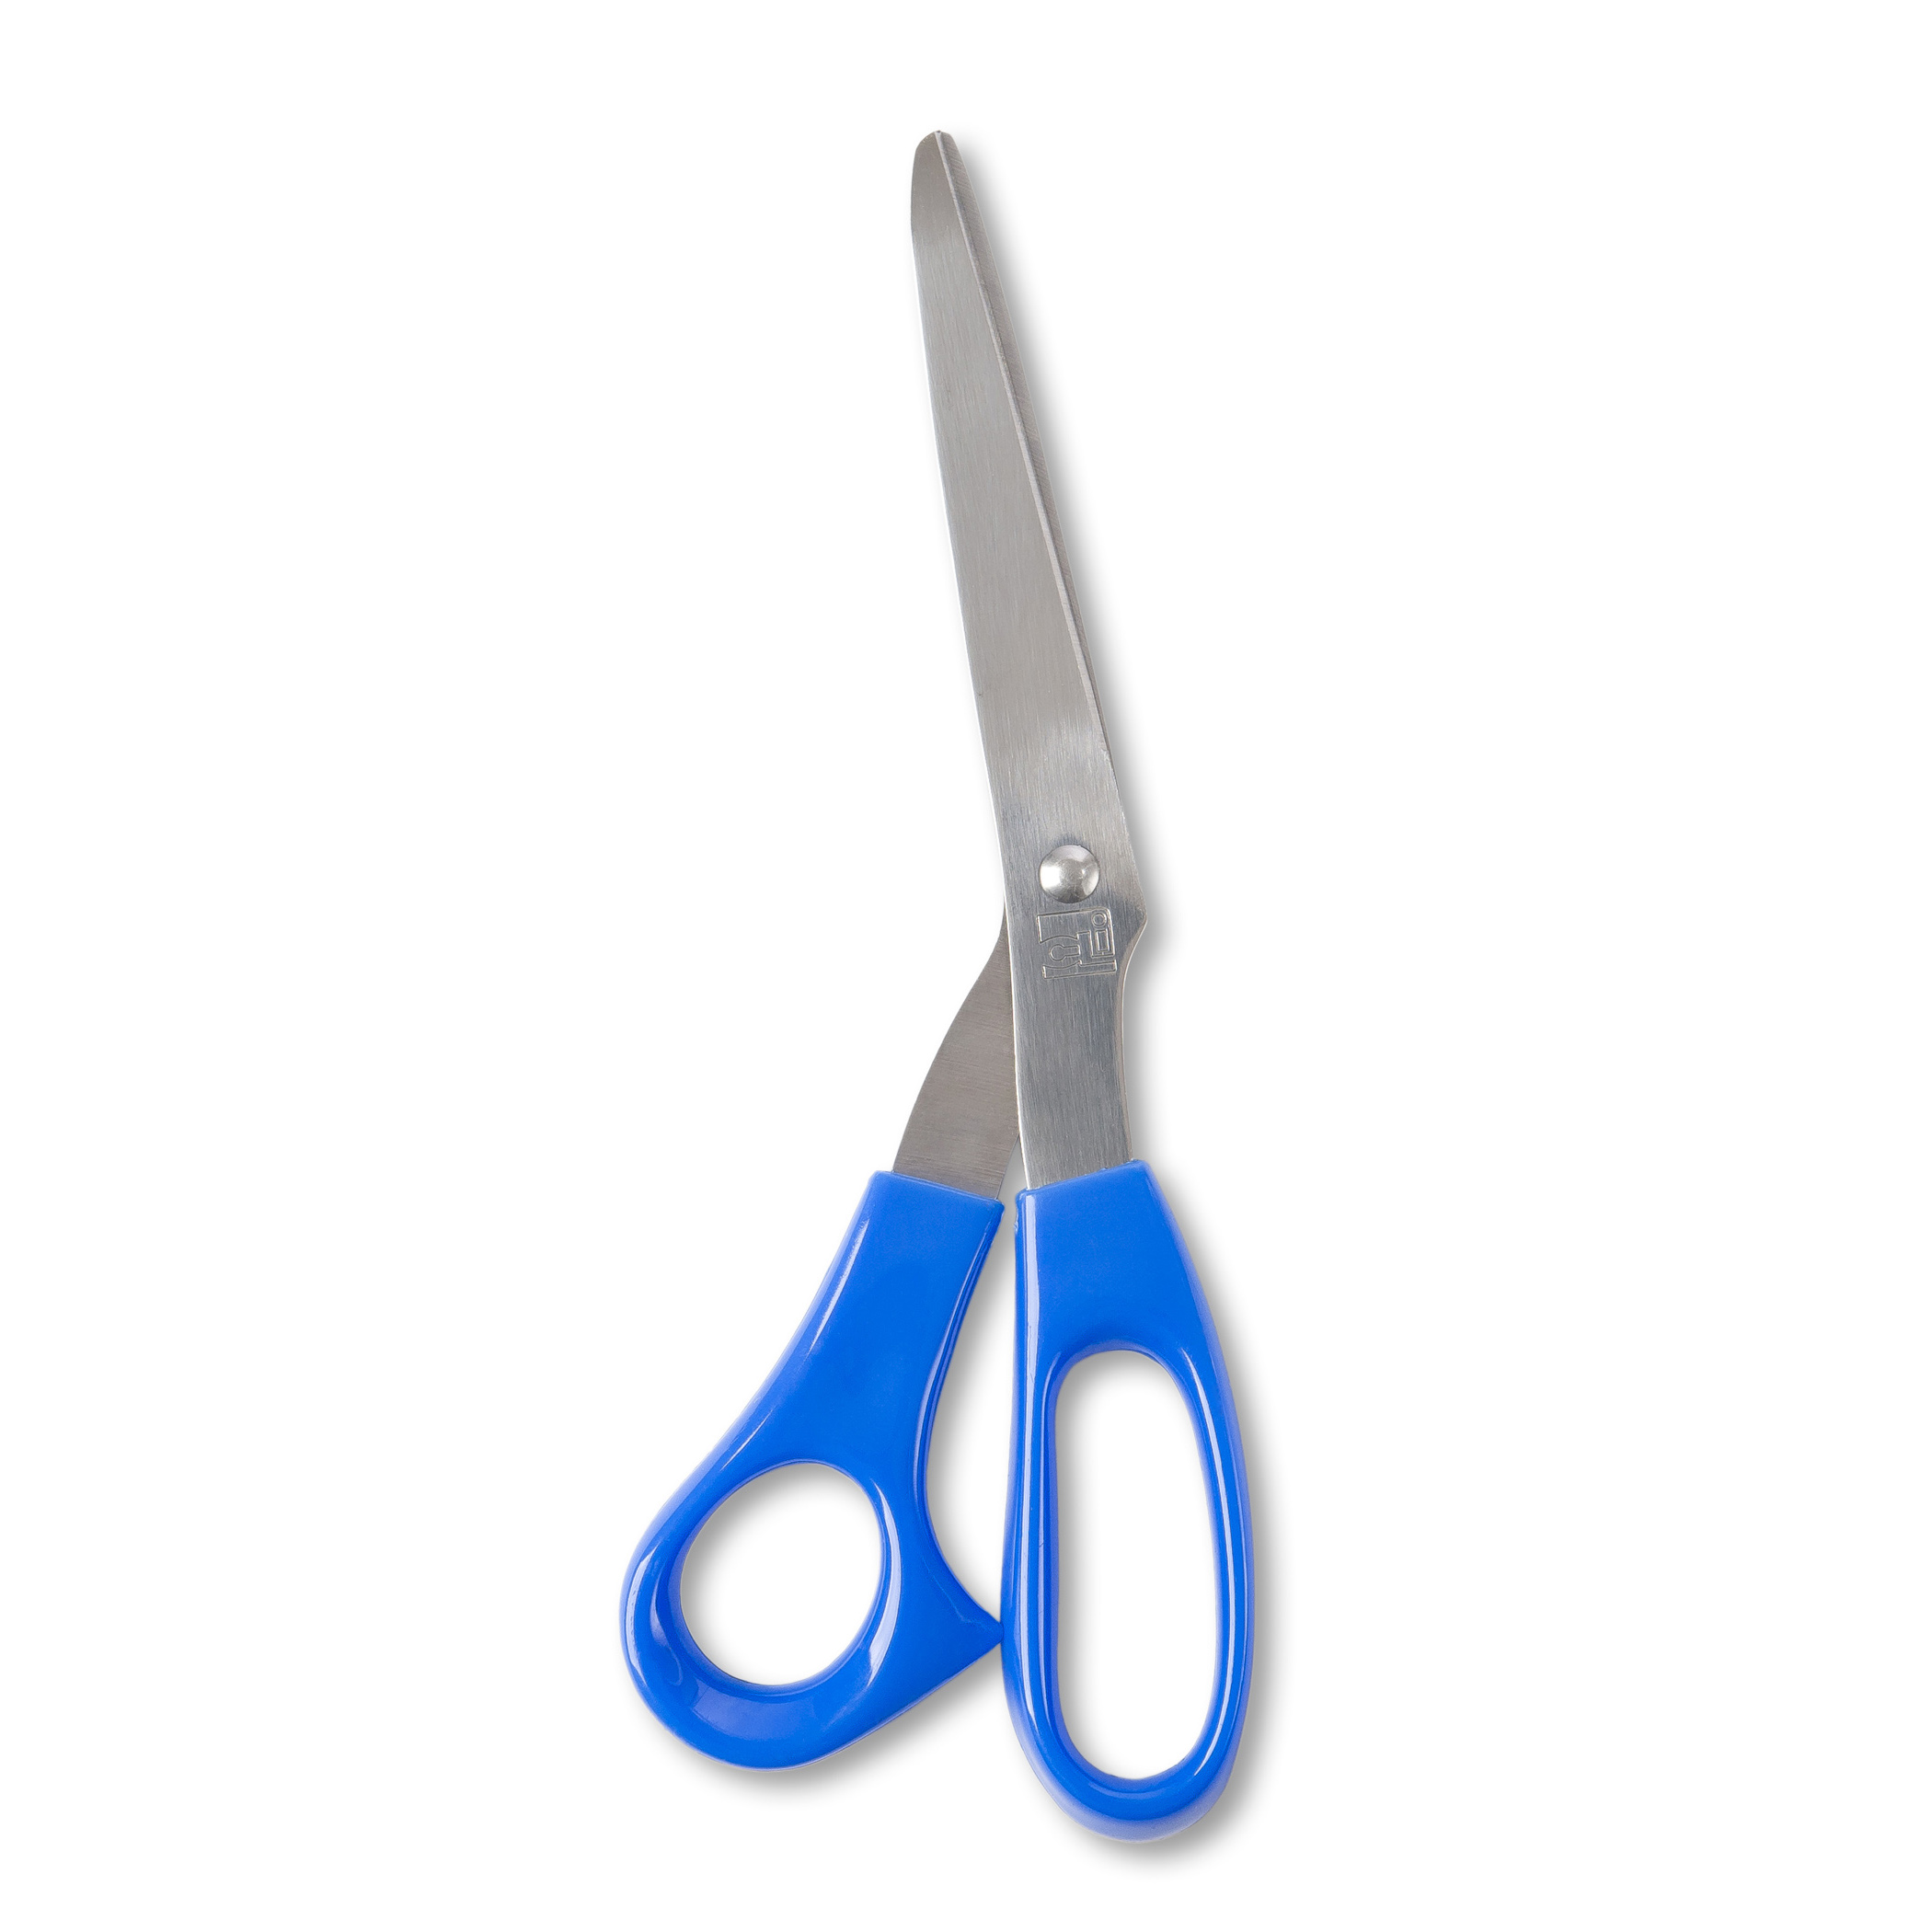 Stainless Steel Shears, 8-1/2", Bent, Blue Handle, Each